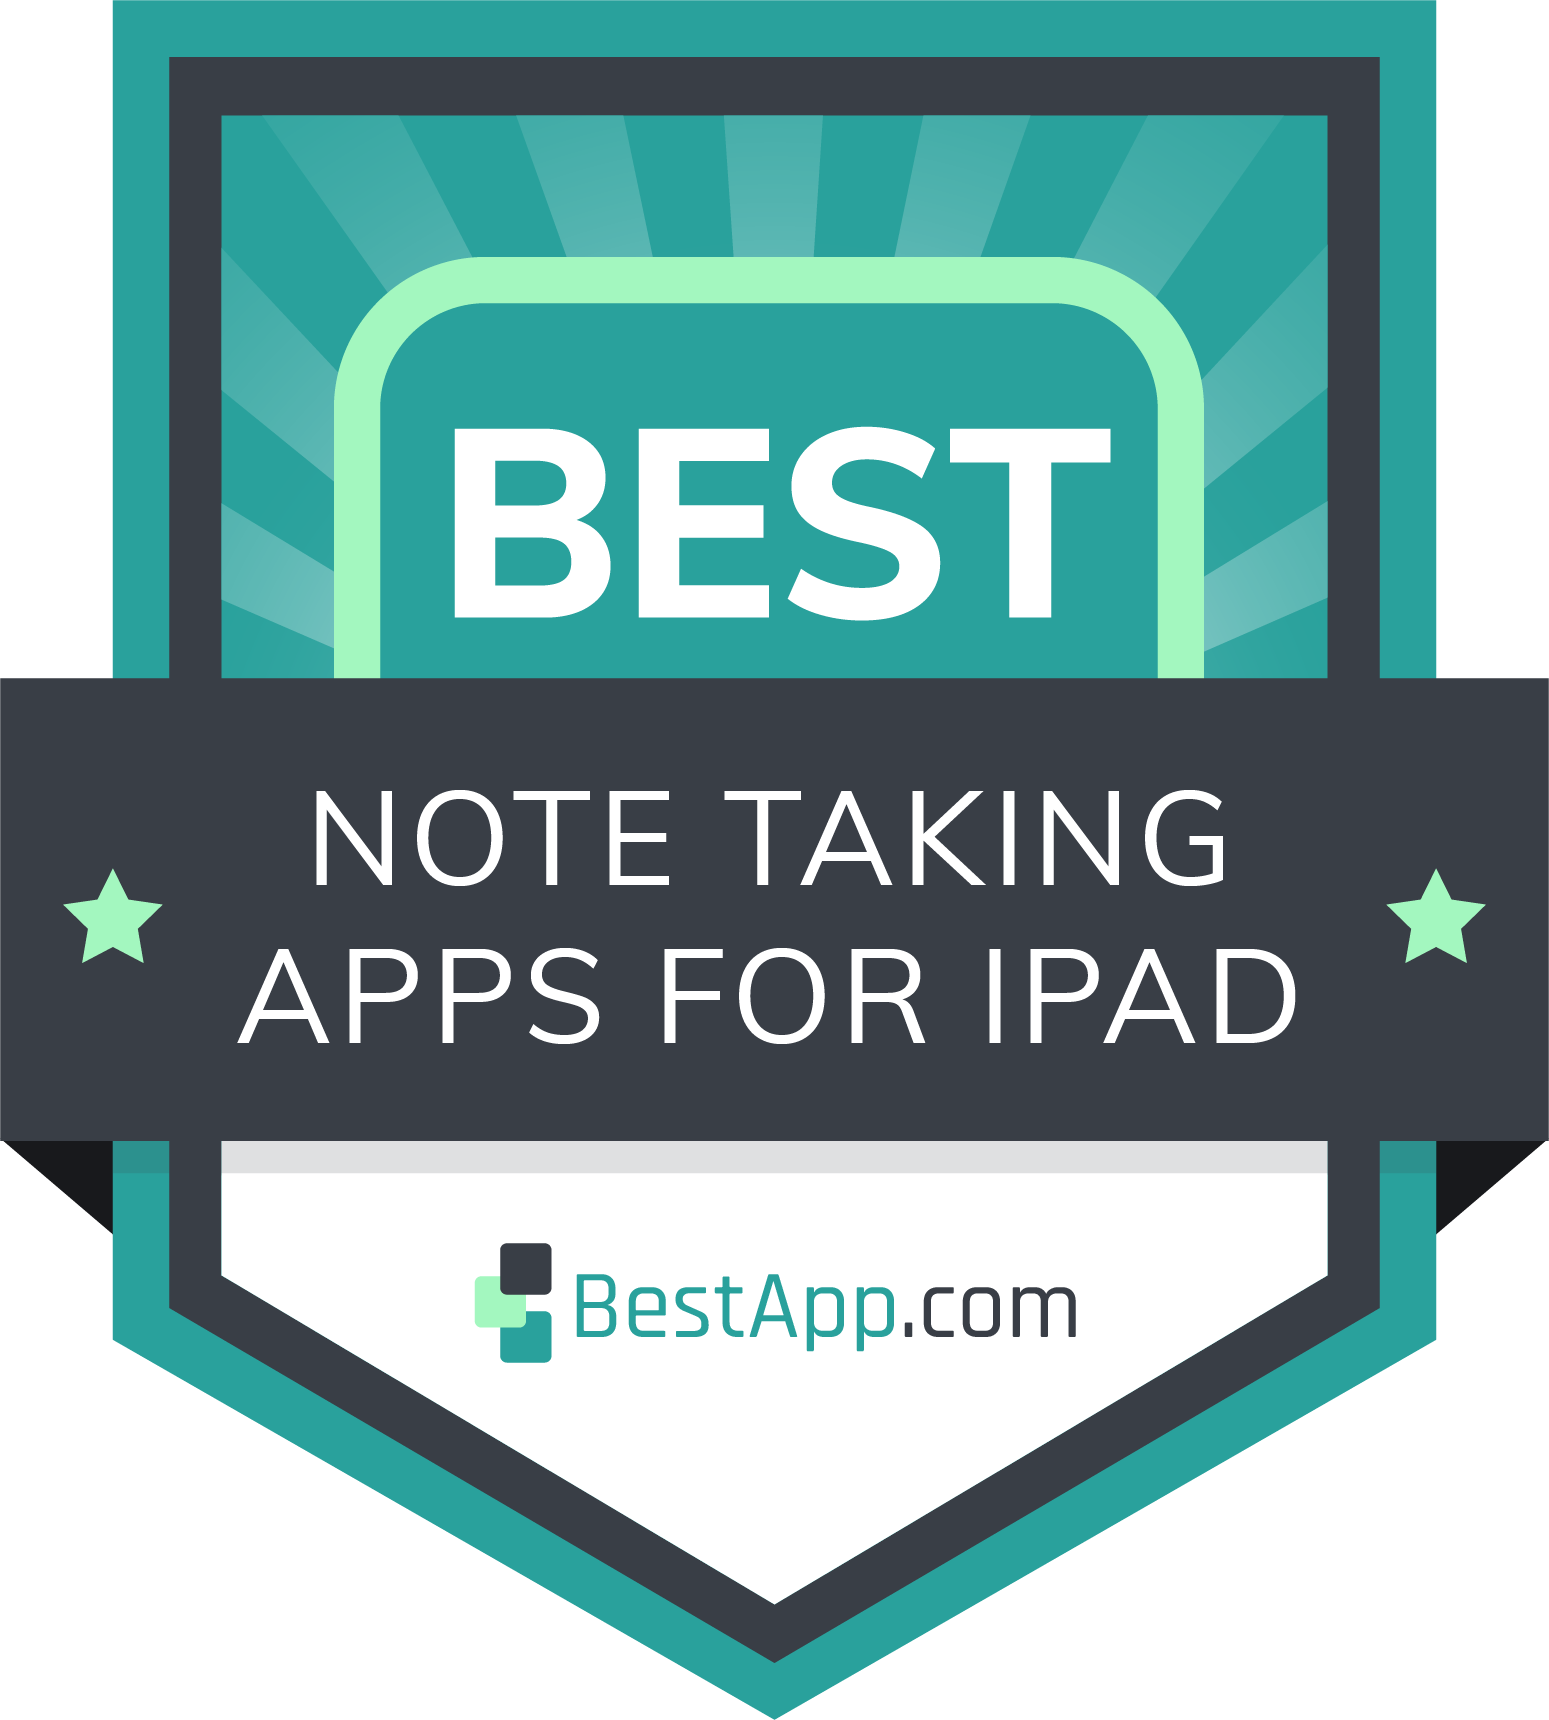 Best Note Taking Apps for iPad Badge